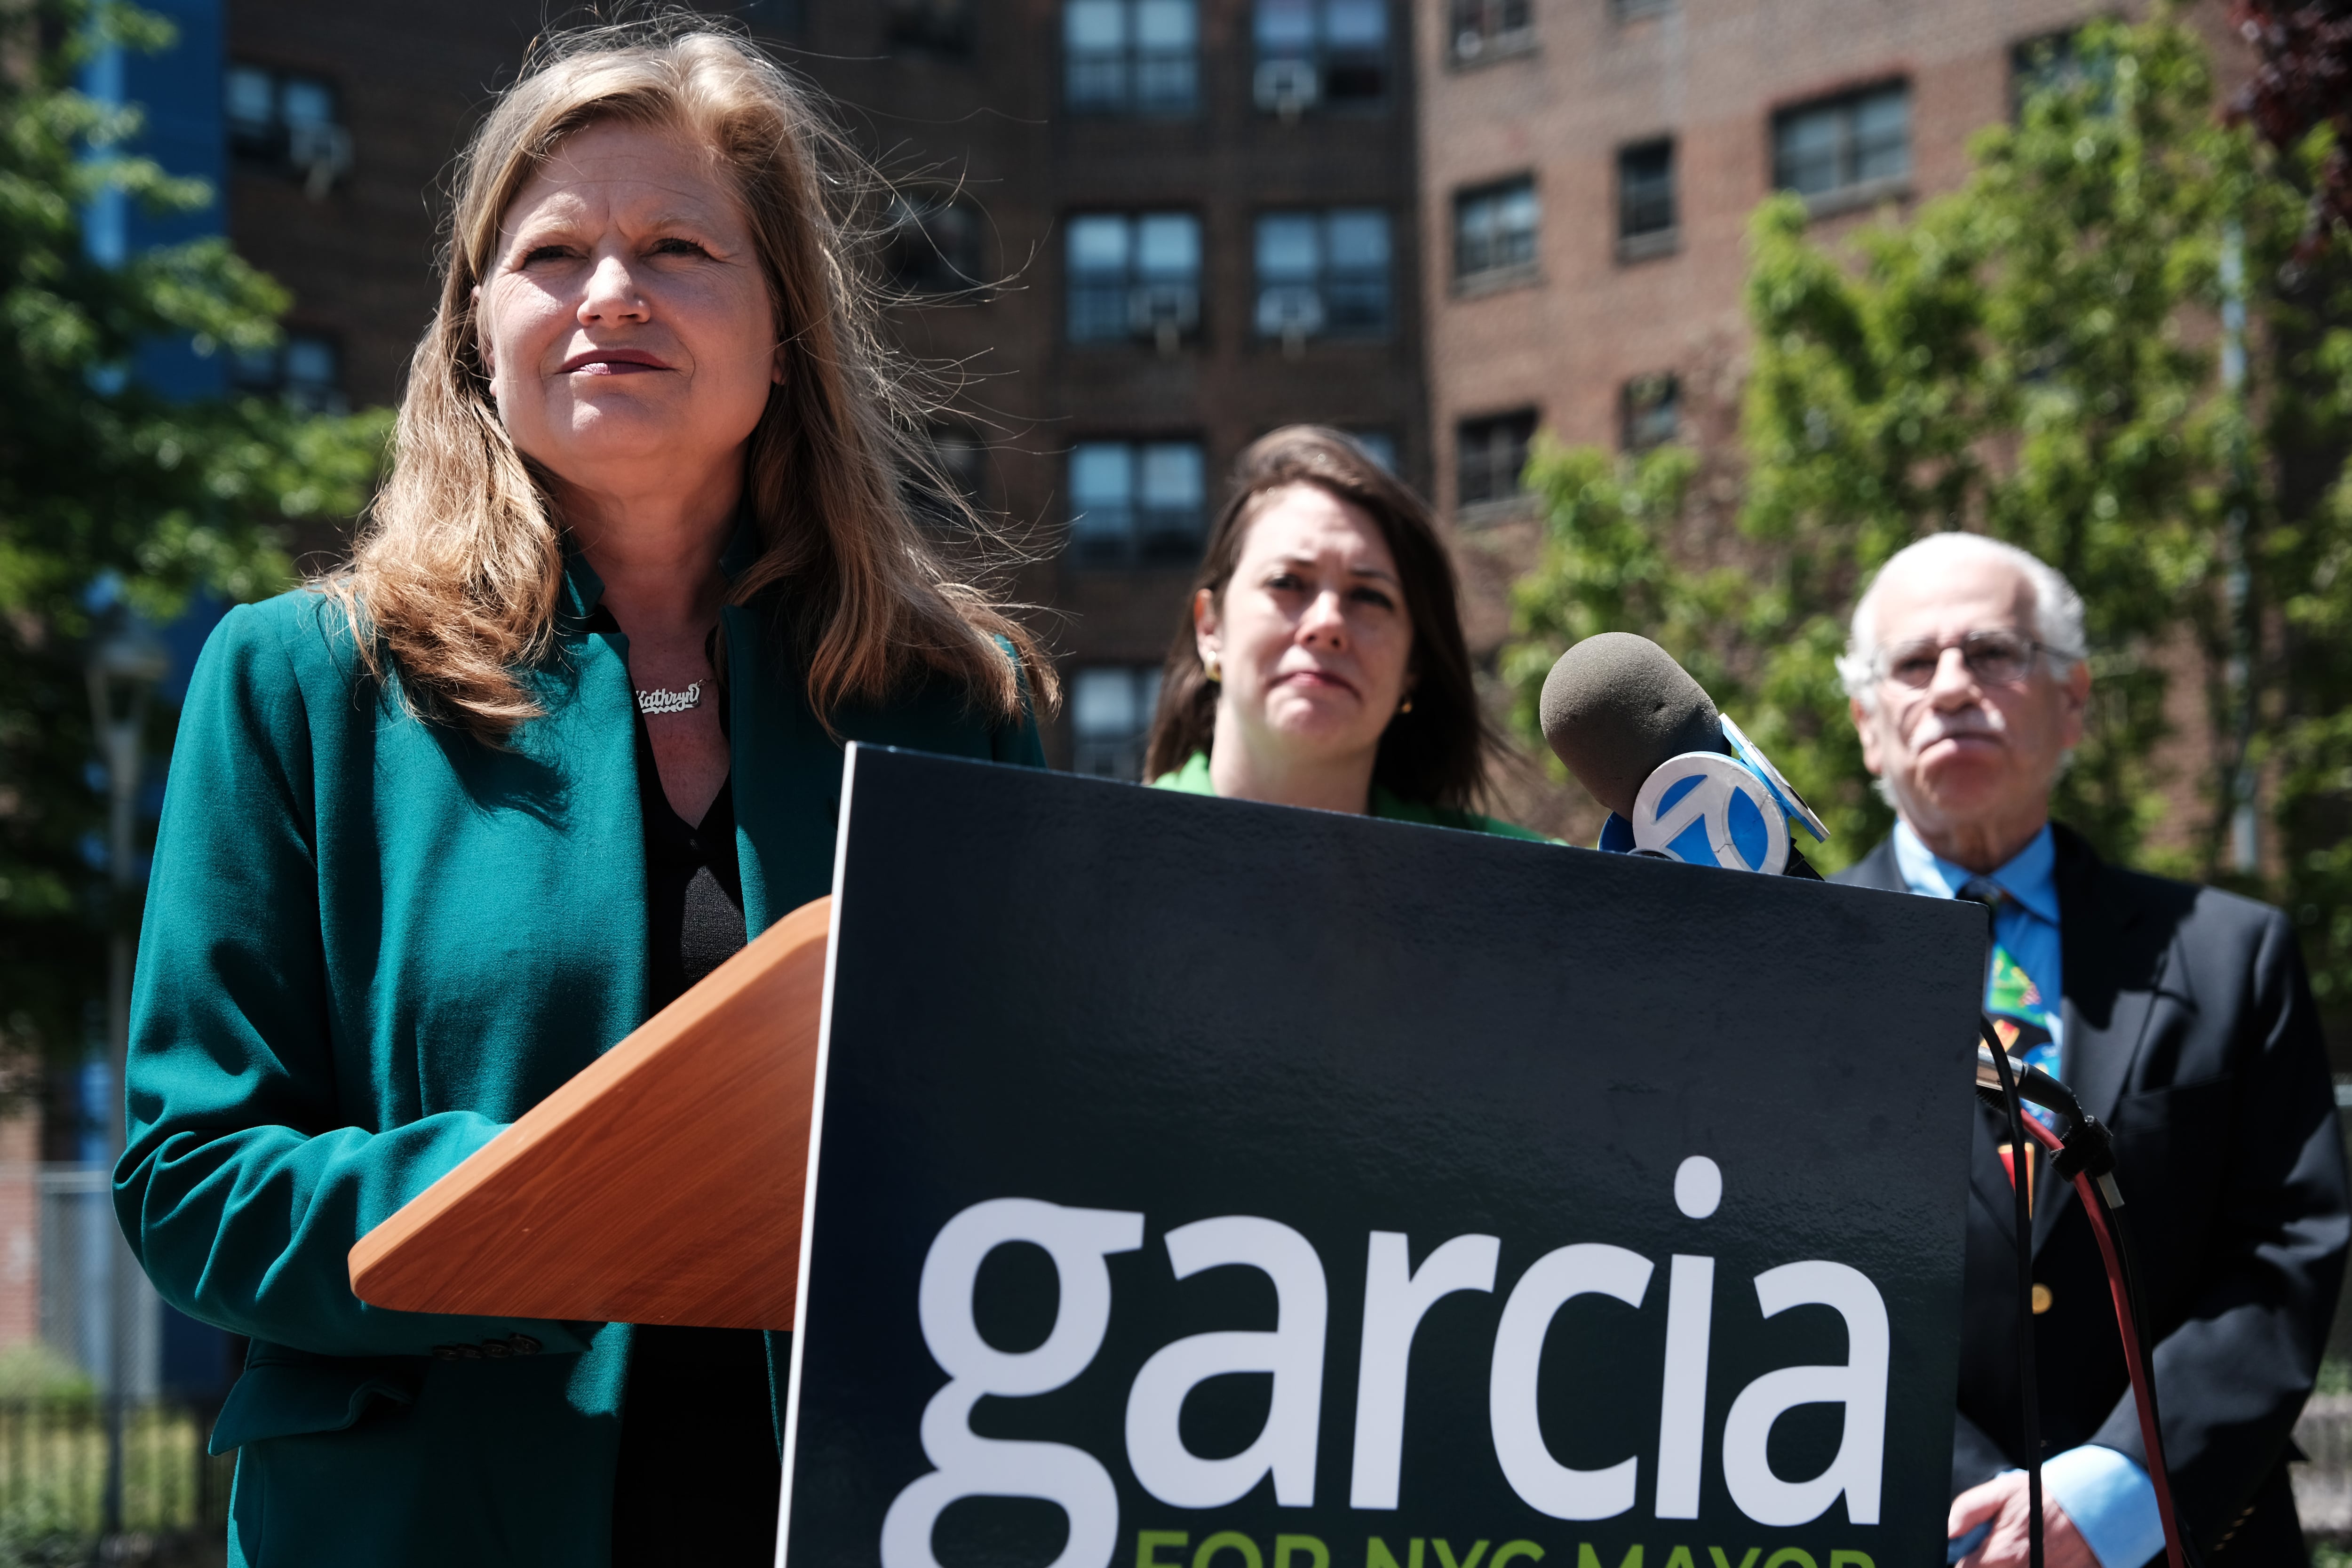 New York City mayoral candidate Kathryn Garcia in Queens on May 25, 2021. If Garcia becomes the next mayor, she might downsize the education department and move more money into principals’ budgets.